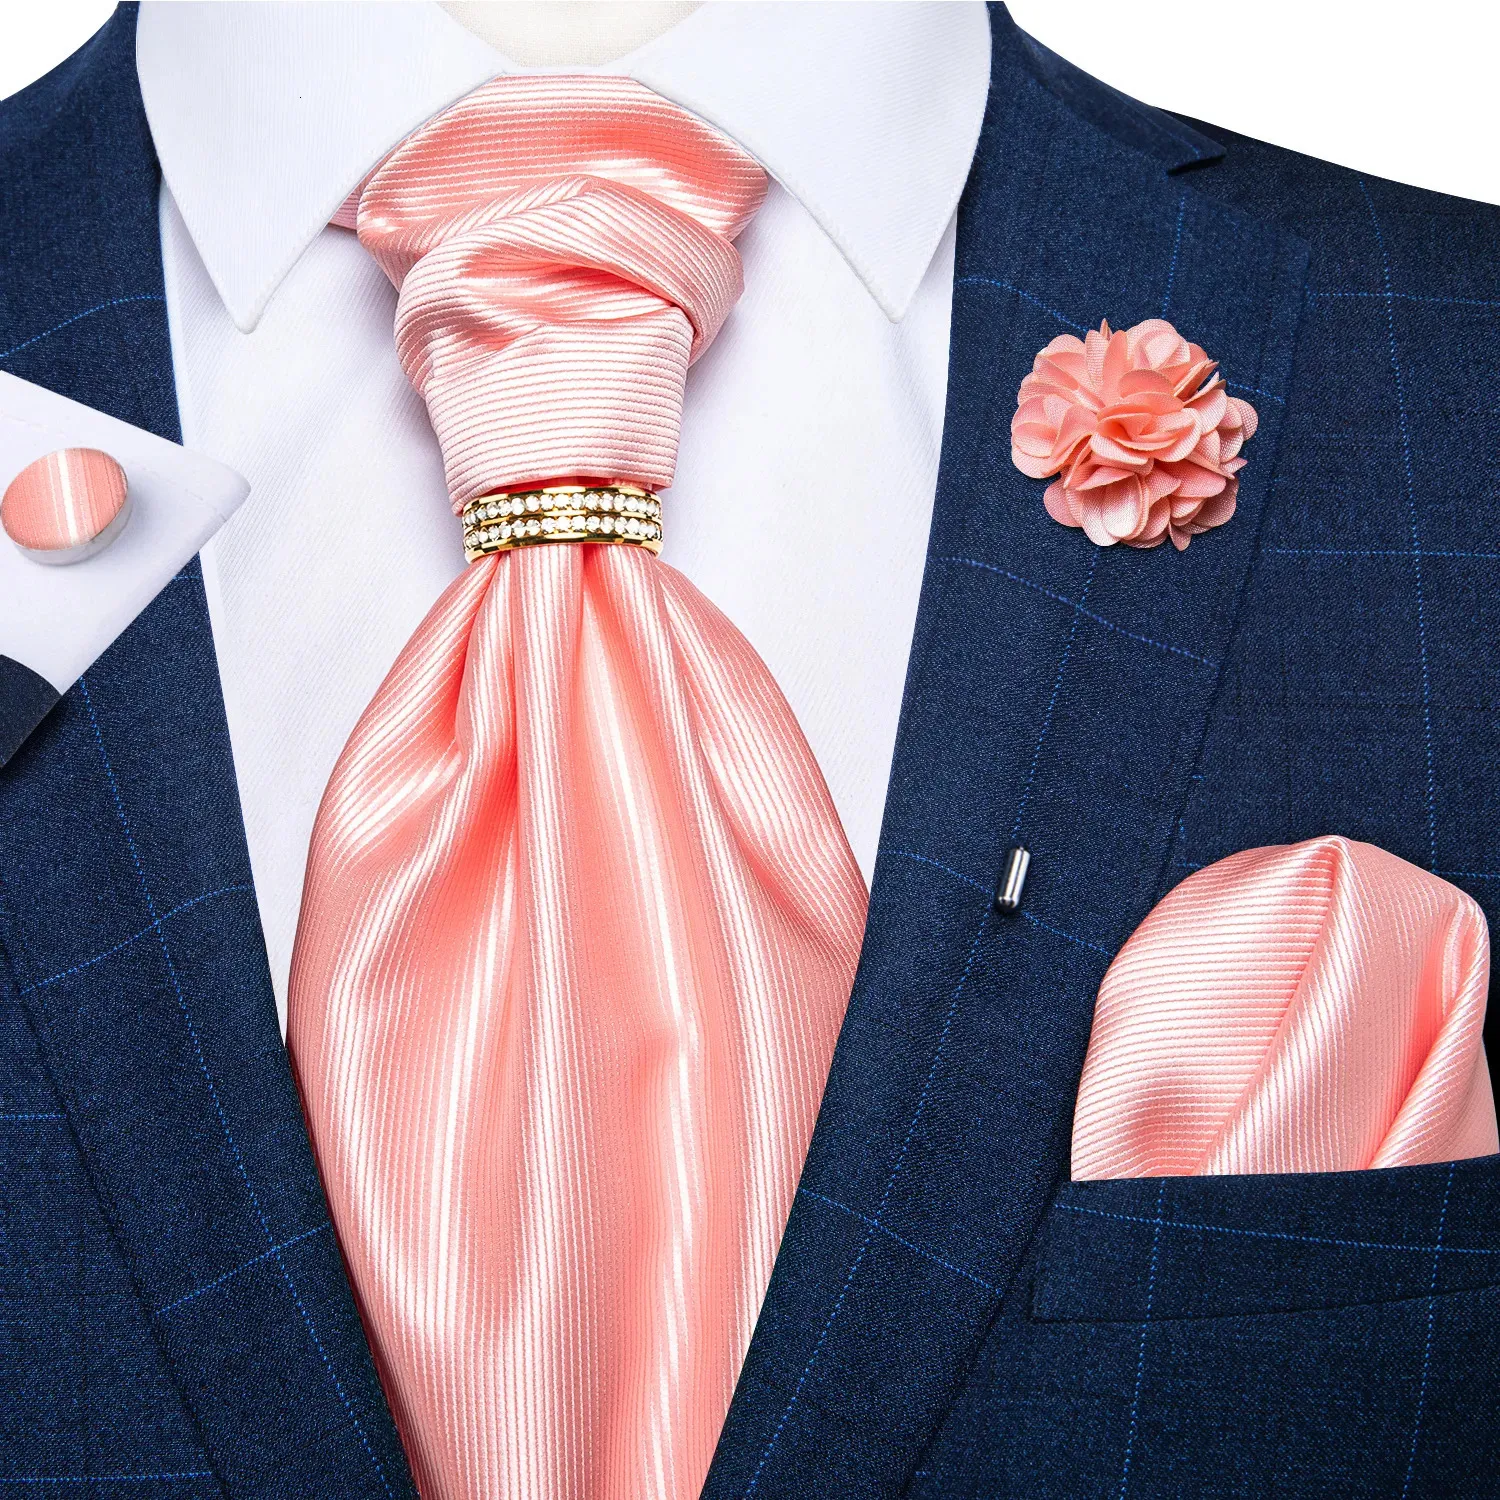 Neck Ties Fashion Ascot Tie for Men Silk Solid Pink Cravat Necktie Ring Brooch Set for Wedding Party Man Suit Accessories Male Scarf Gift 231013